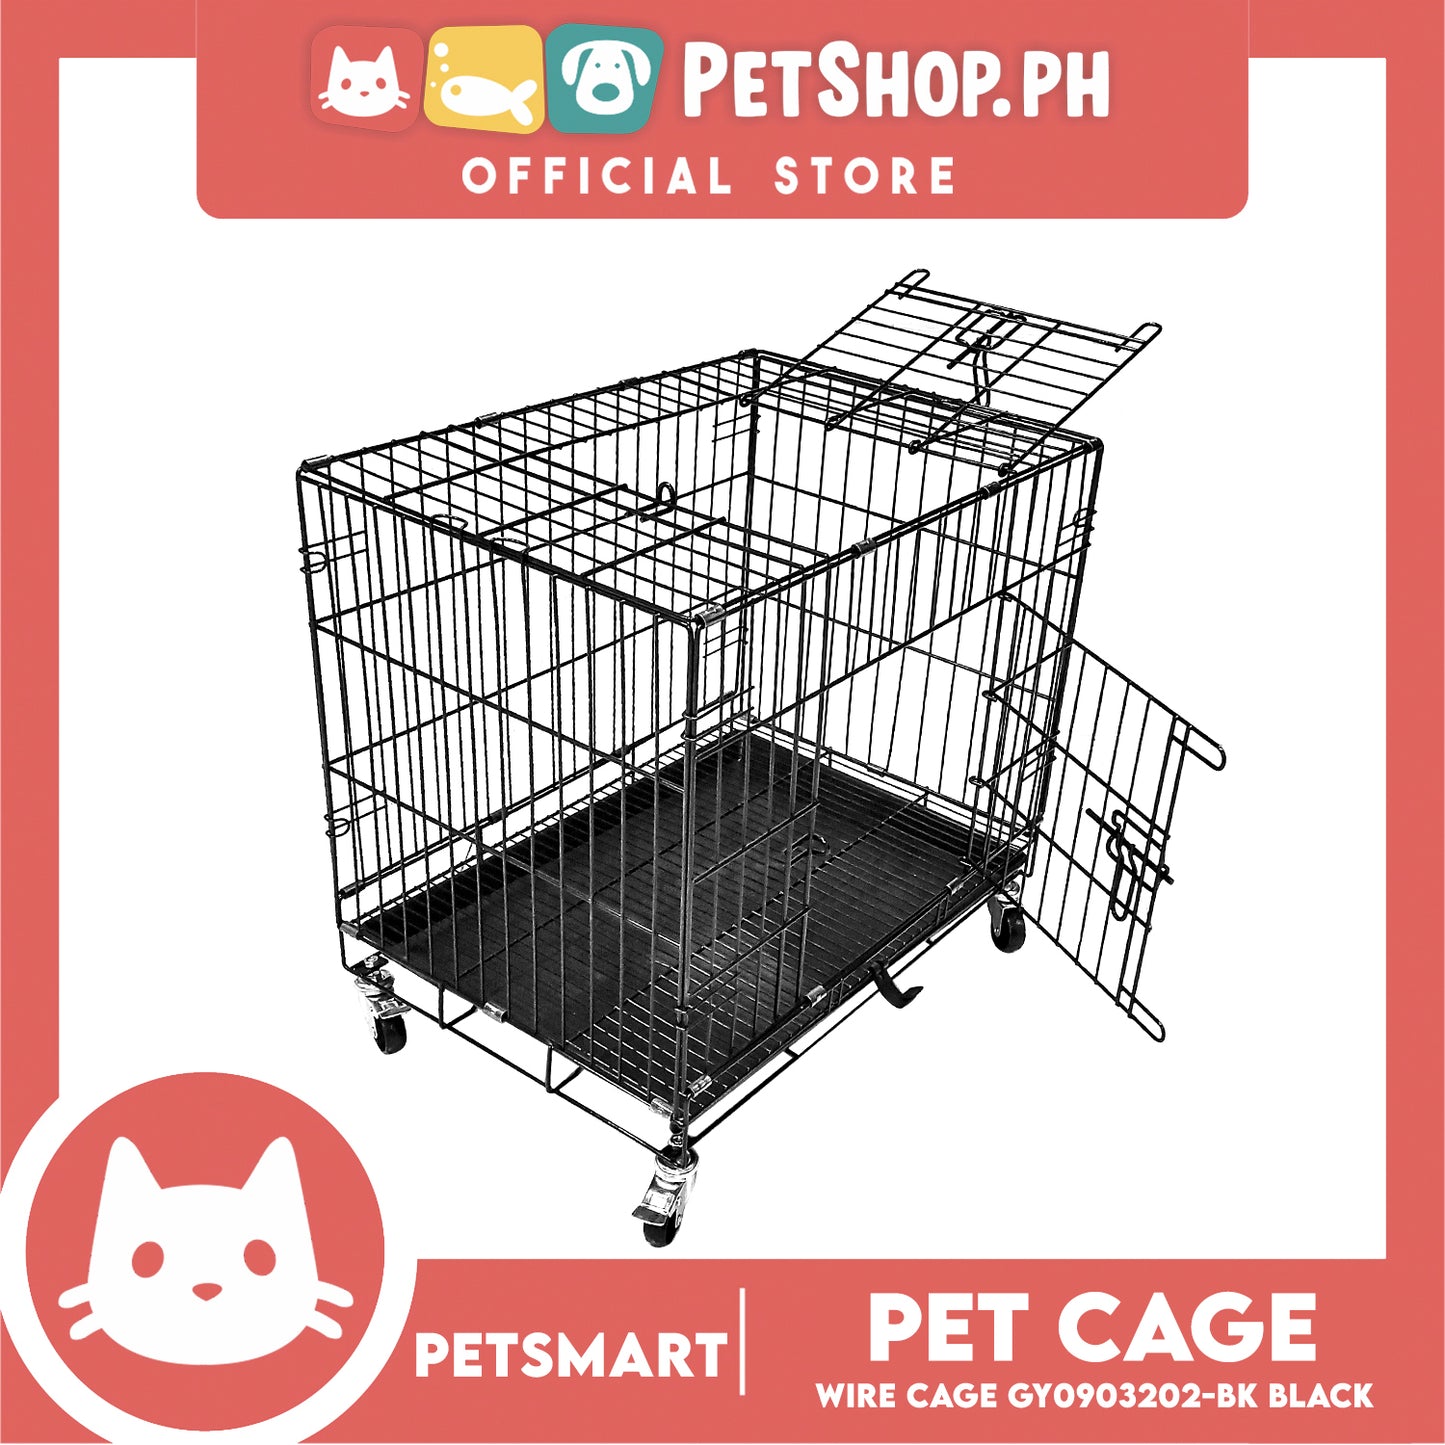 Pet Cage Wire Flooring, Painted Black Wire Cage, Comes With Tray Underneath (GY0903202) 60cm x 43cm x 50cm Pet Cage, Pet Accessories, Pet House